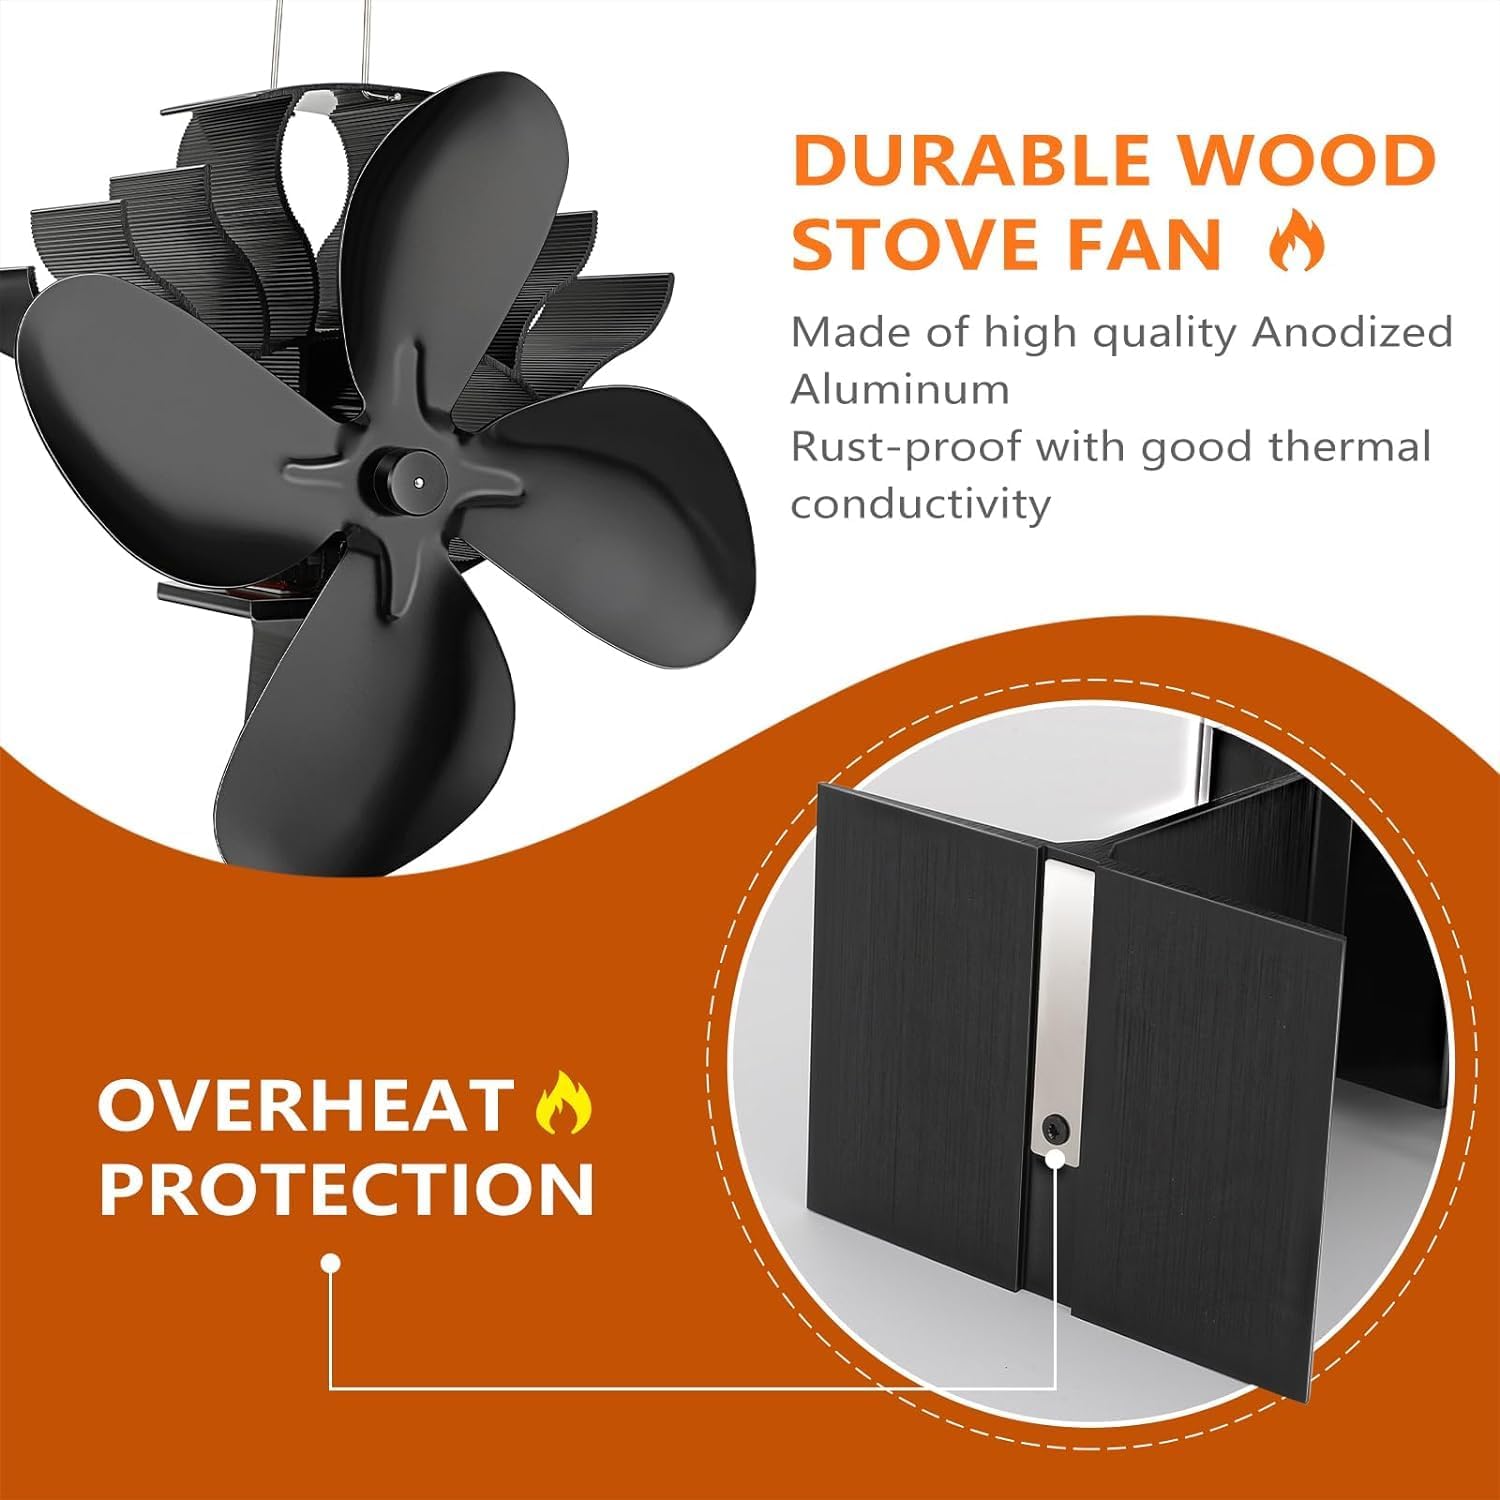 XTIMES Stove Fan for Buddy Heater Wood Stove Fan Heat Powered Fireplace Fan with Magnetic Thermometer Thermoelectric Fan Eco Fan for Wood Burning Stove/Pellet/Log Burner - XTIMES Stove Fan Review